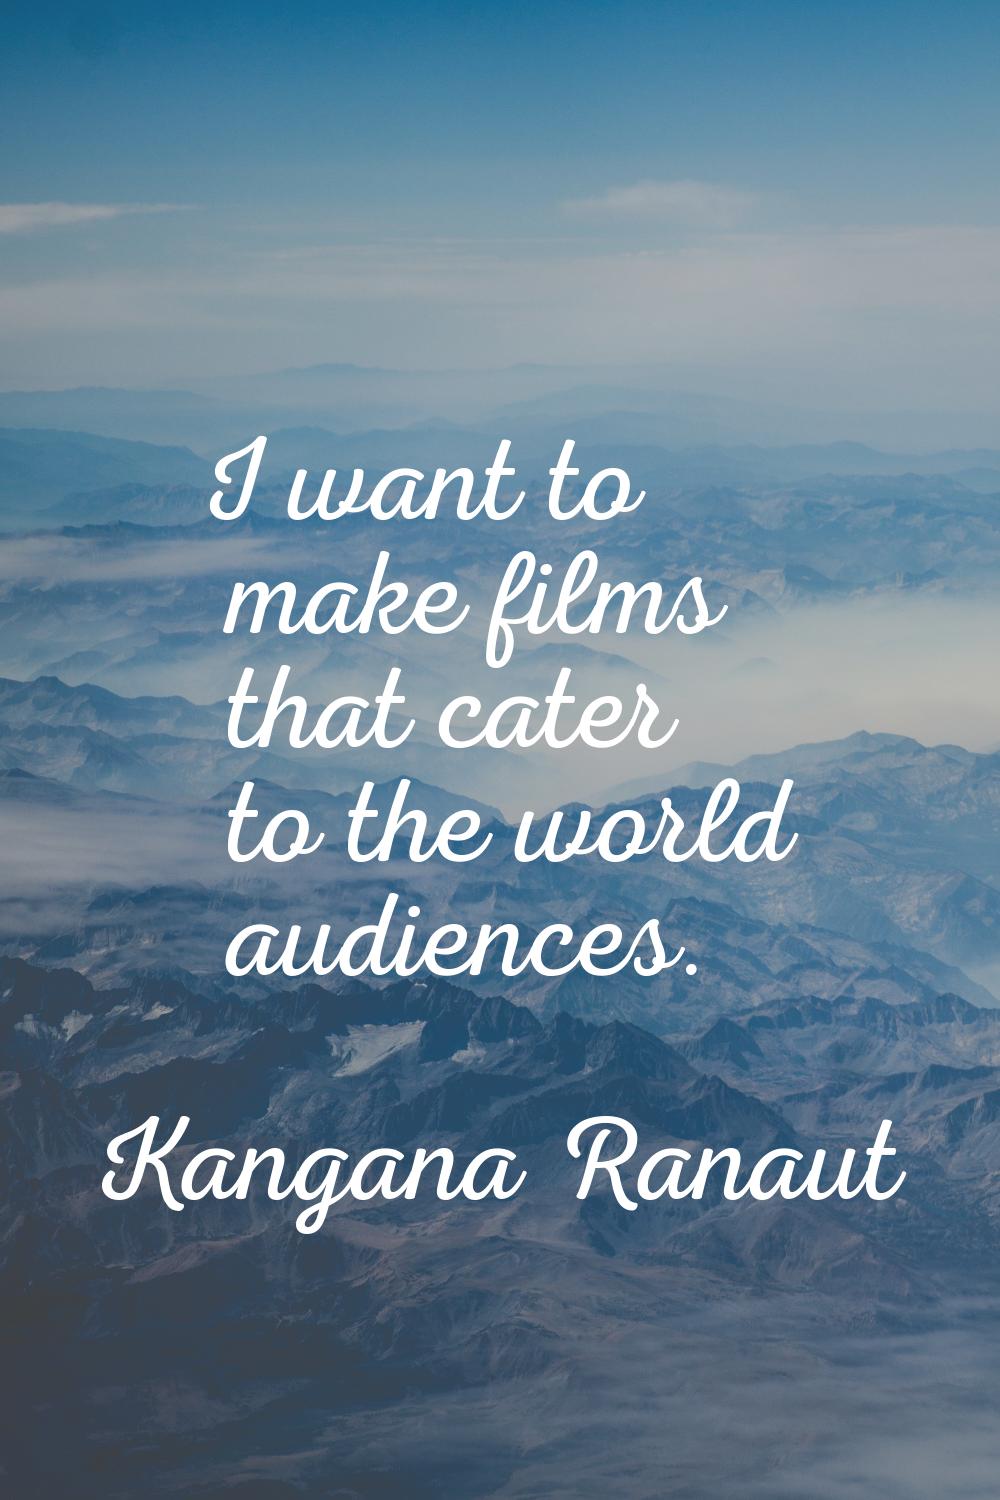 I want to make films that cater to the world audiences.